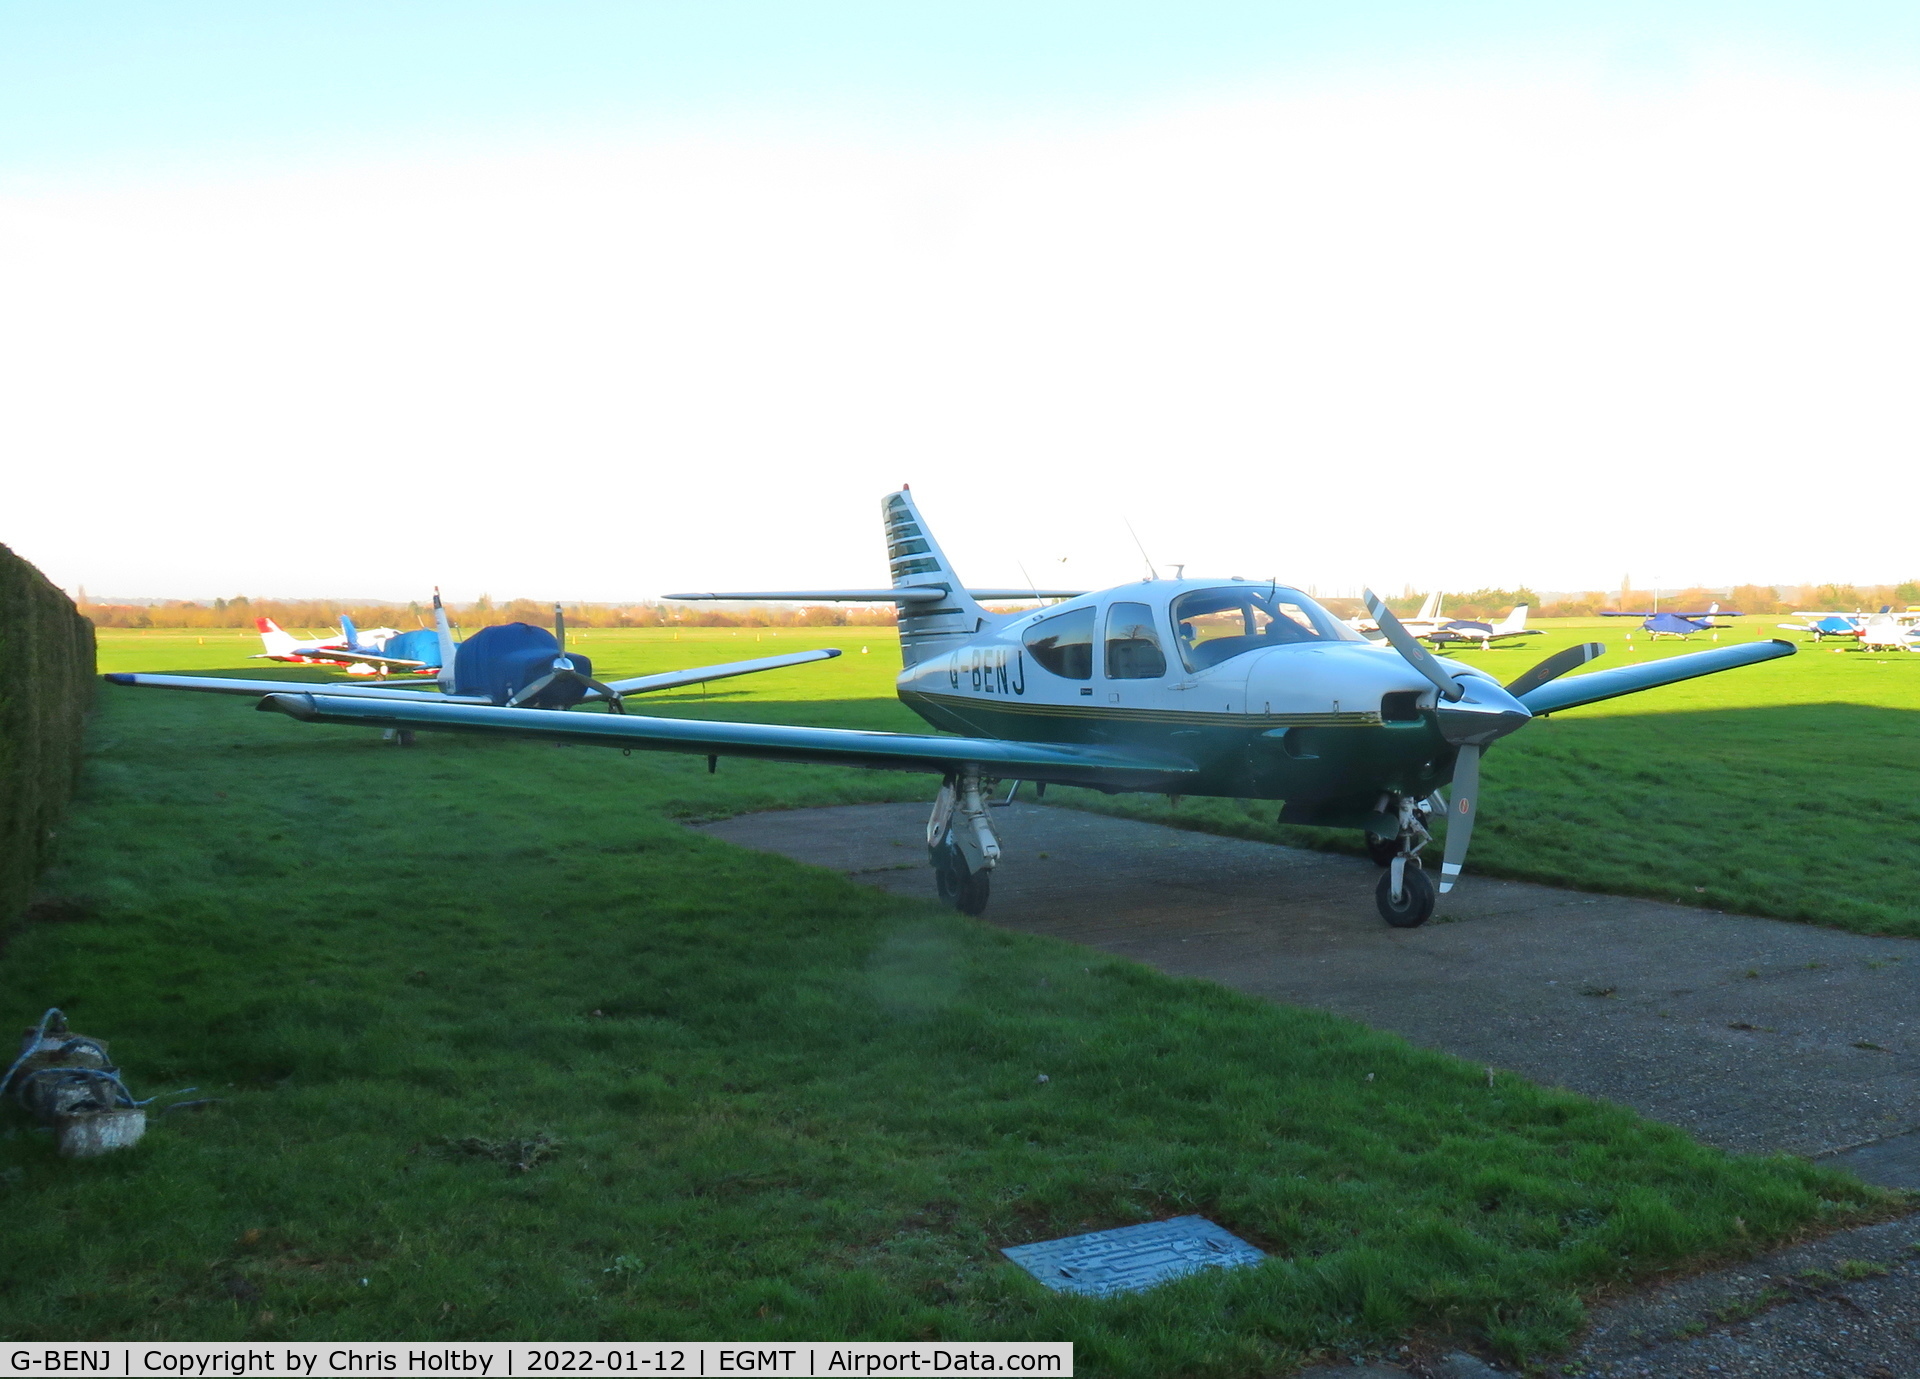 G-BENJ, 1976 Rockwell Commander 112B C/N 522, Parked at Thurrock Airfield, Essex